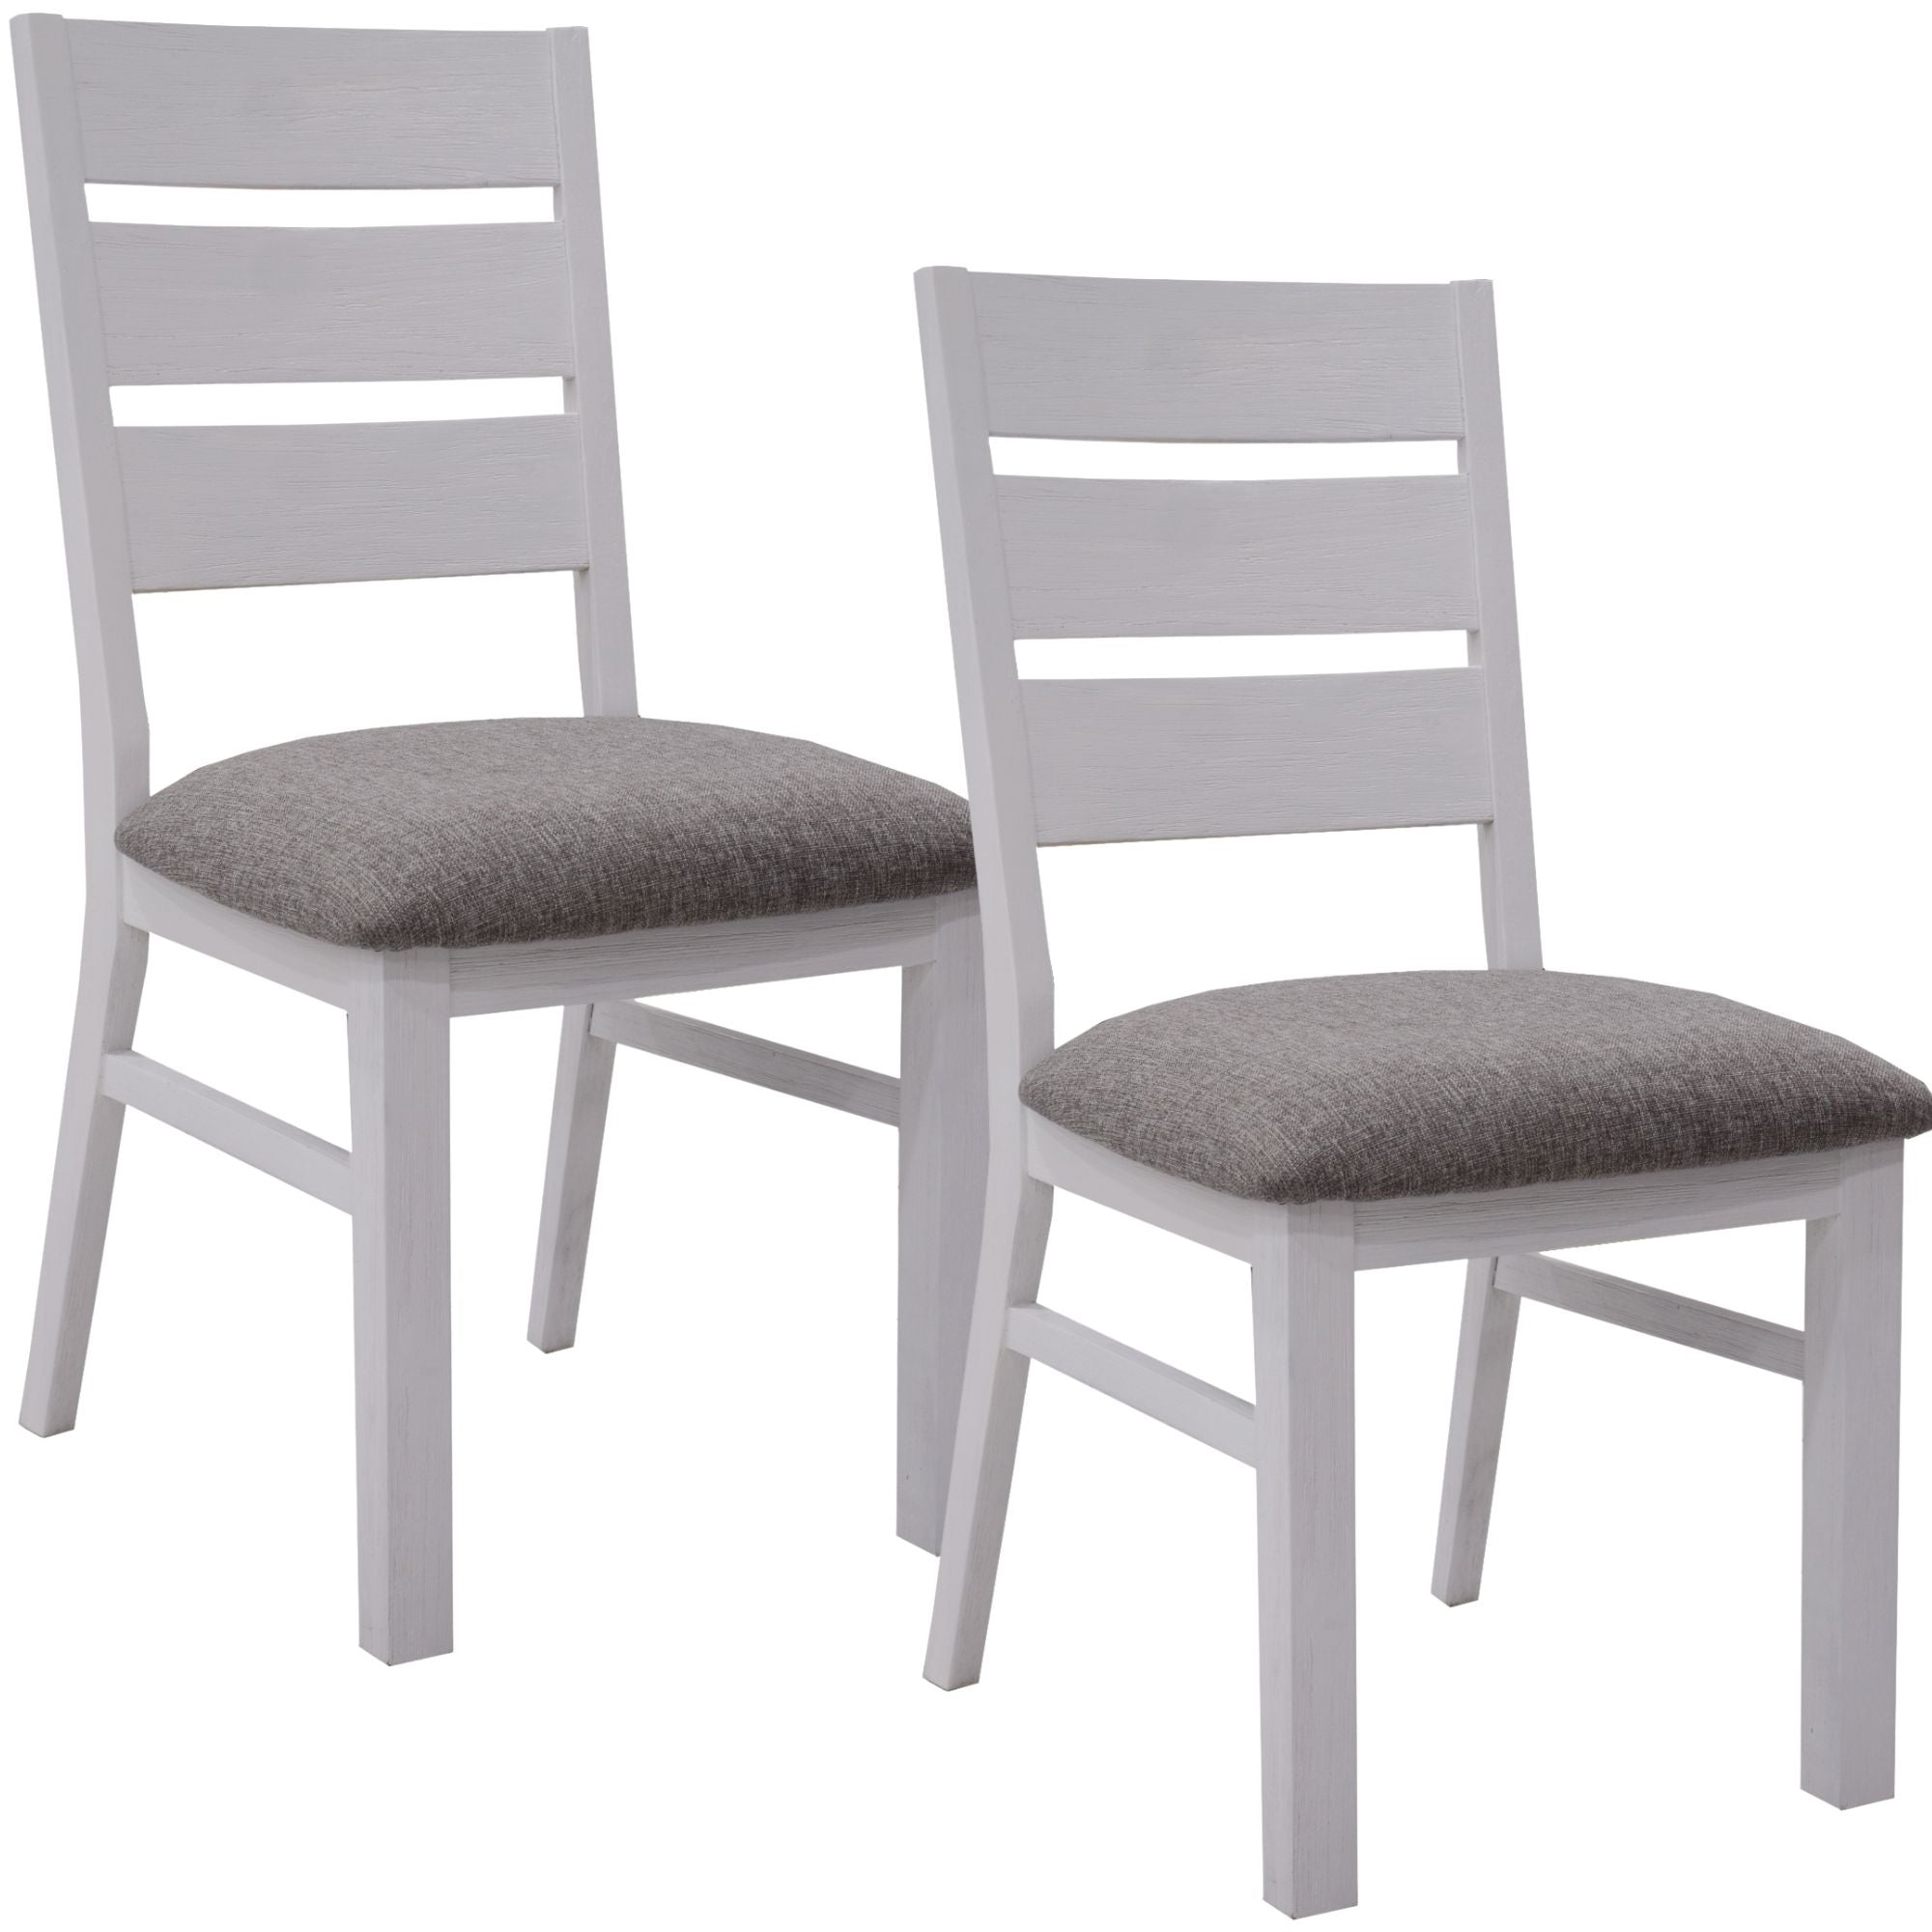 plumeria-dining-chair-set-of-2-solid-acacia-wood-dining-furniture-white-brush